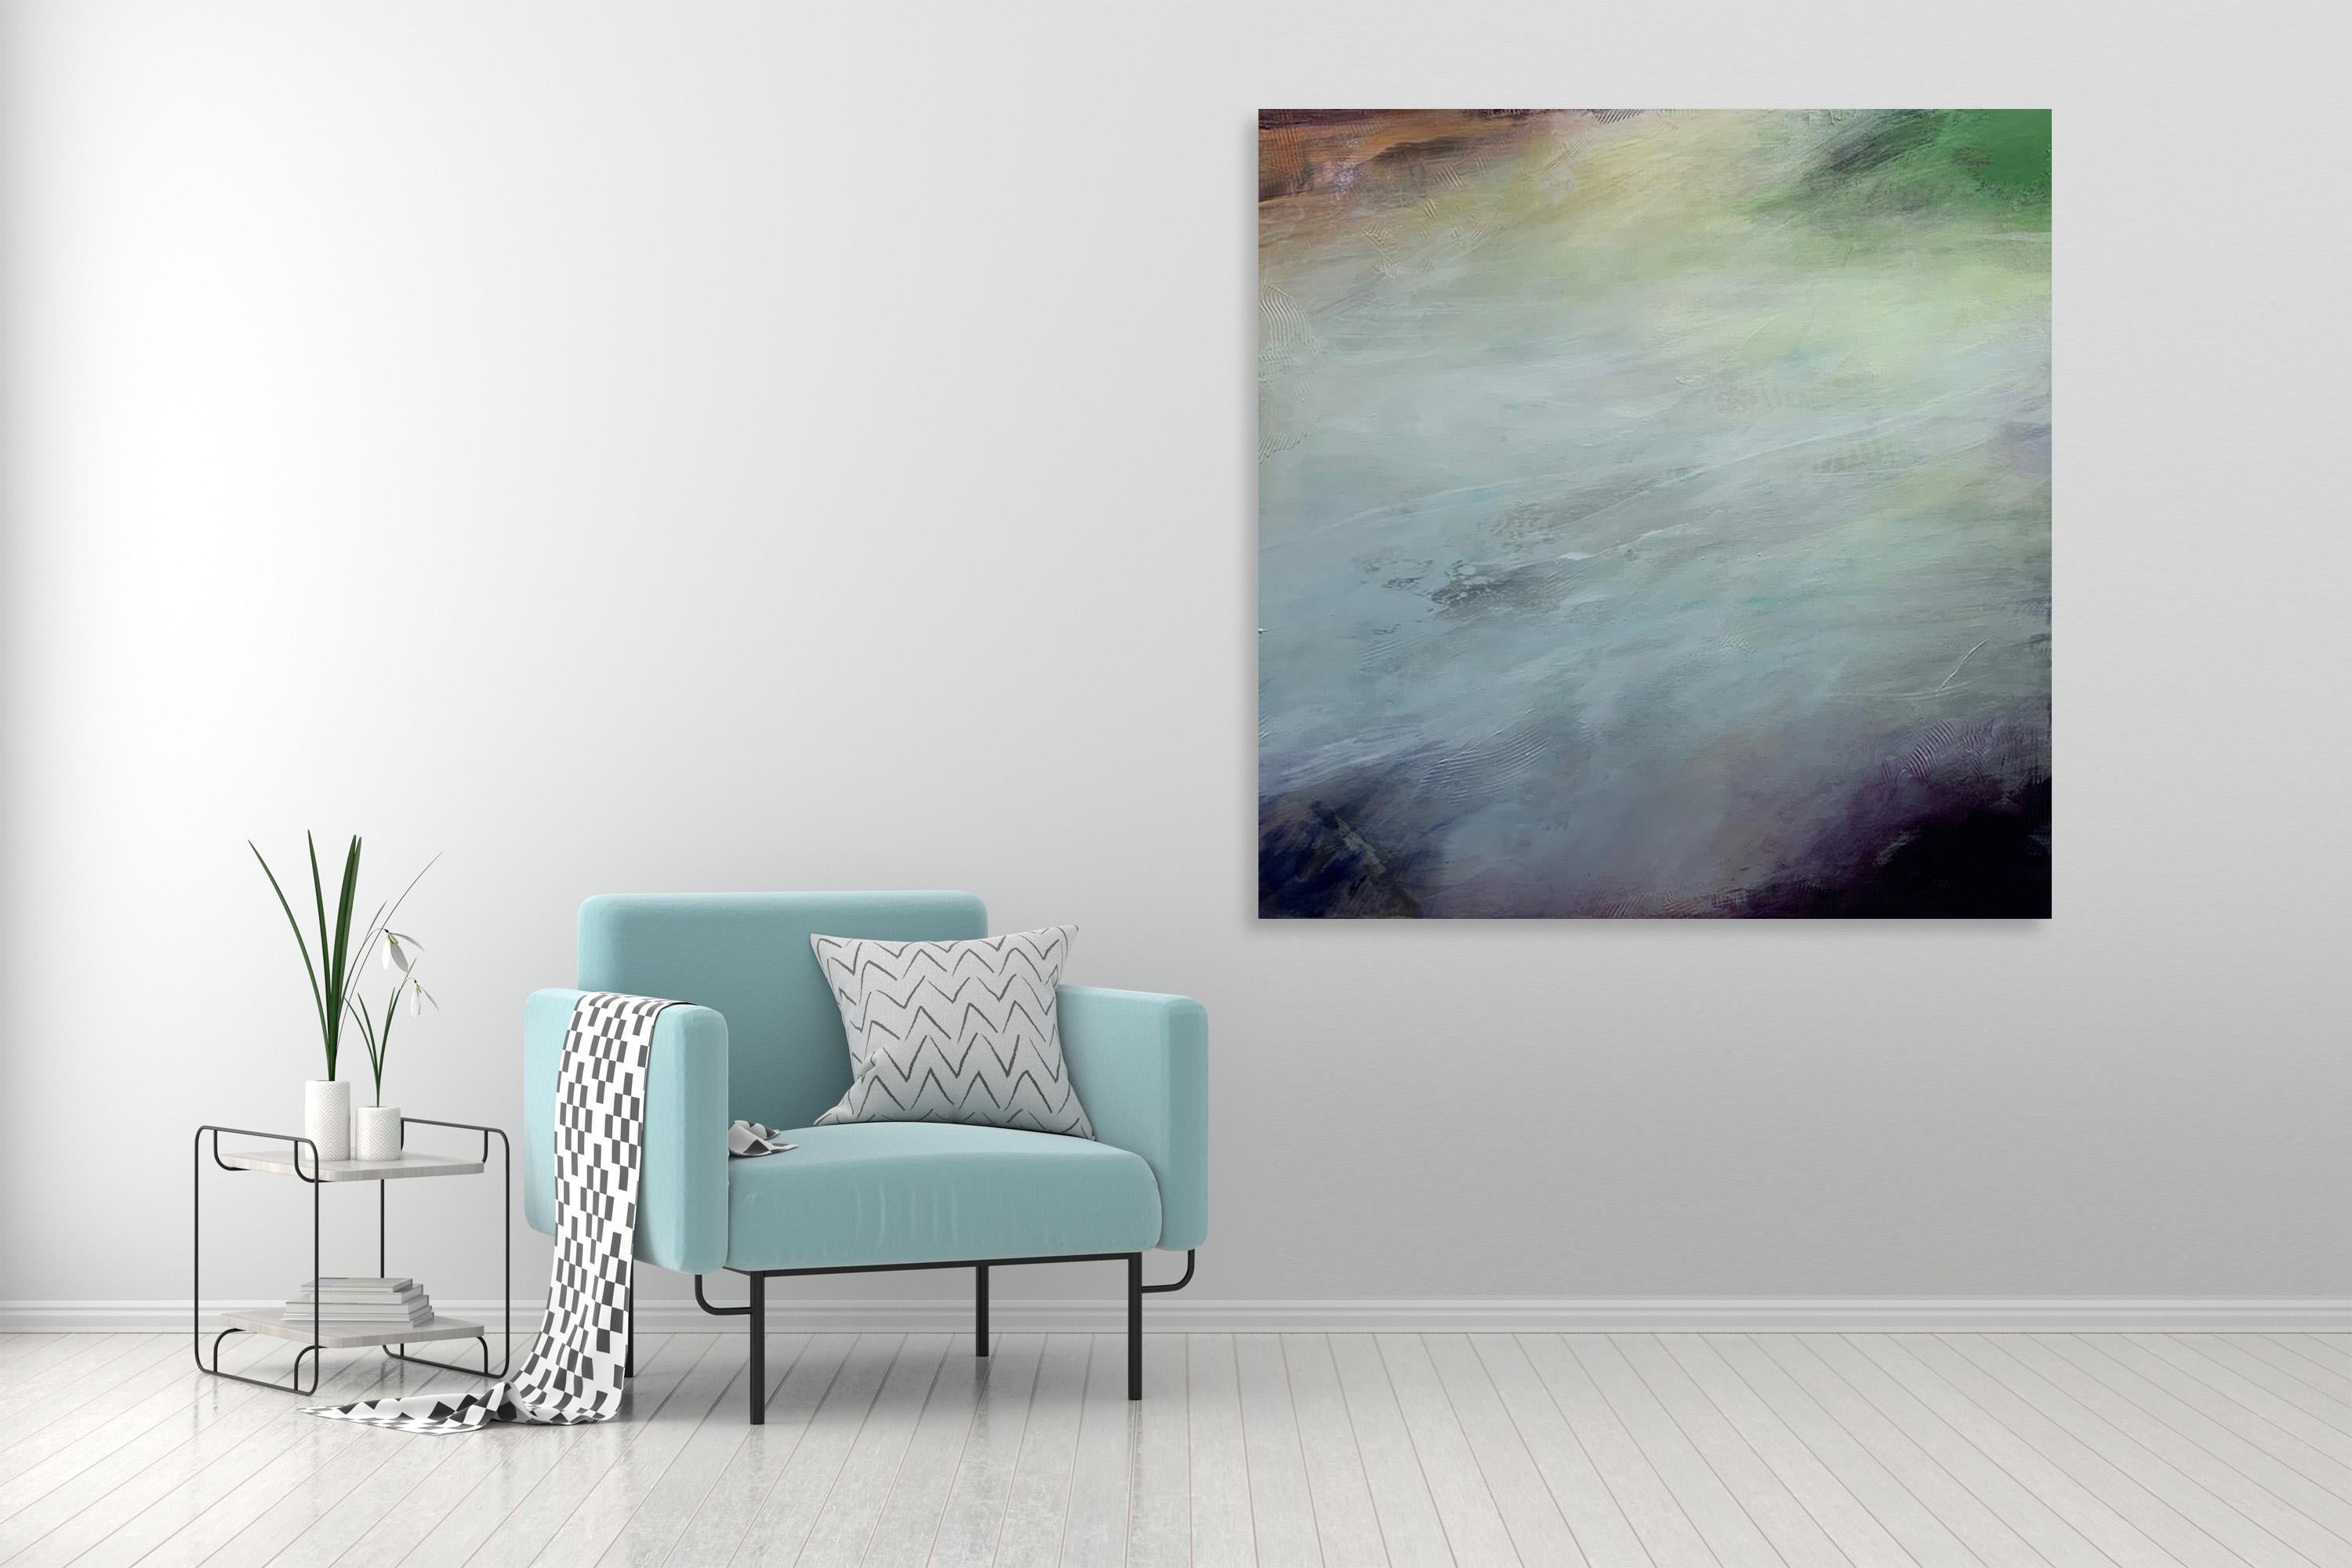  Abstract Large Contemporary  Mixed Media Painting By Katheryn  - Gray Abstract Painting by Katheryn Holt